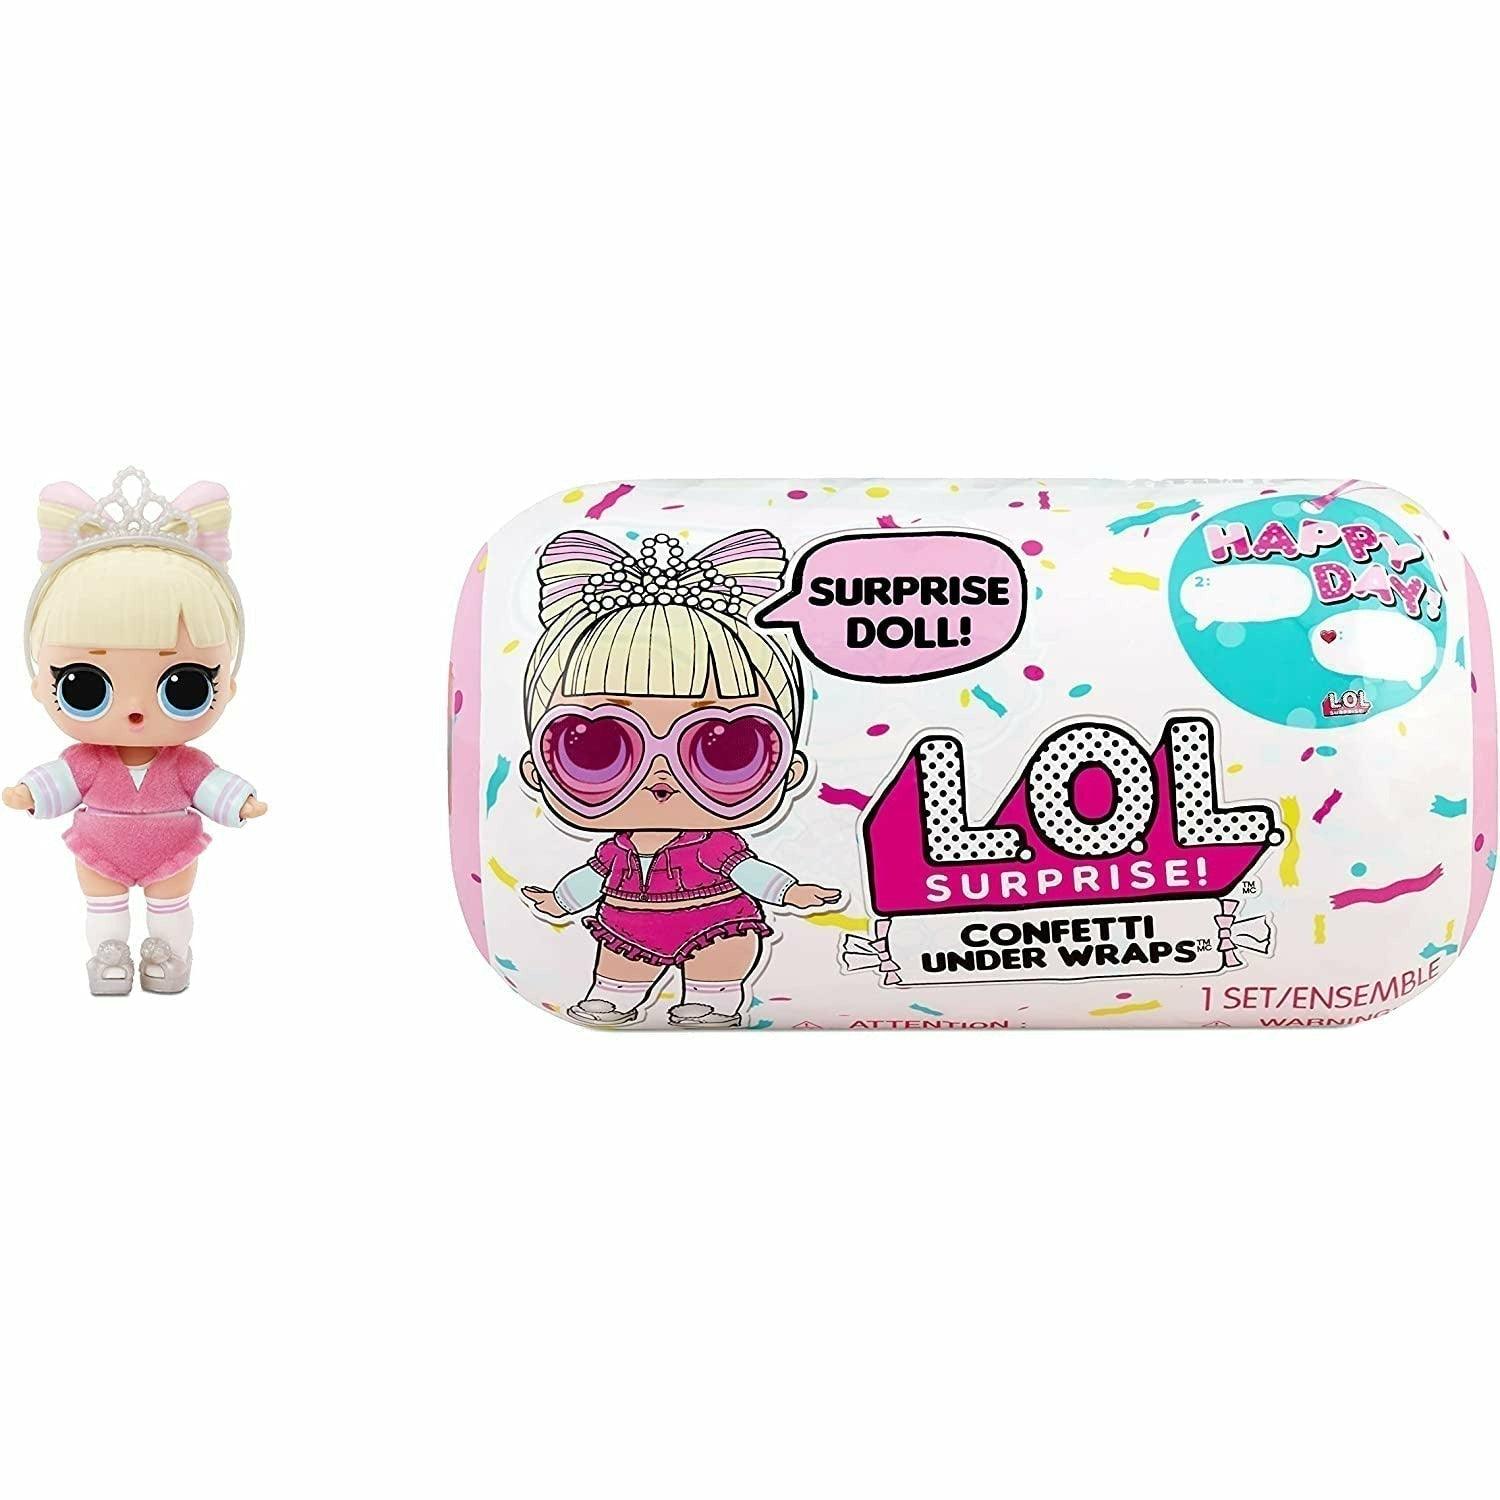 L.O.L Surprise Confetti Reveal Including Collectible Doll & Confetti Pop Fashion Outfits With 15 Surprises - BumbleToys - 5-7 Years, Dolls, Fashion Dolls & Accessories, Girls, L.O.L, OXE, Pre-Order